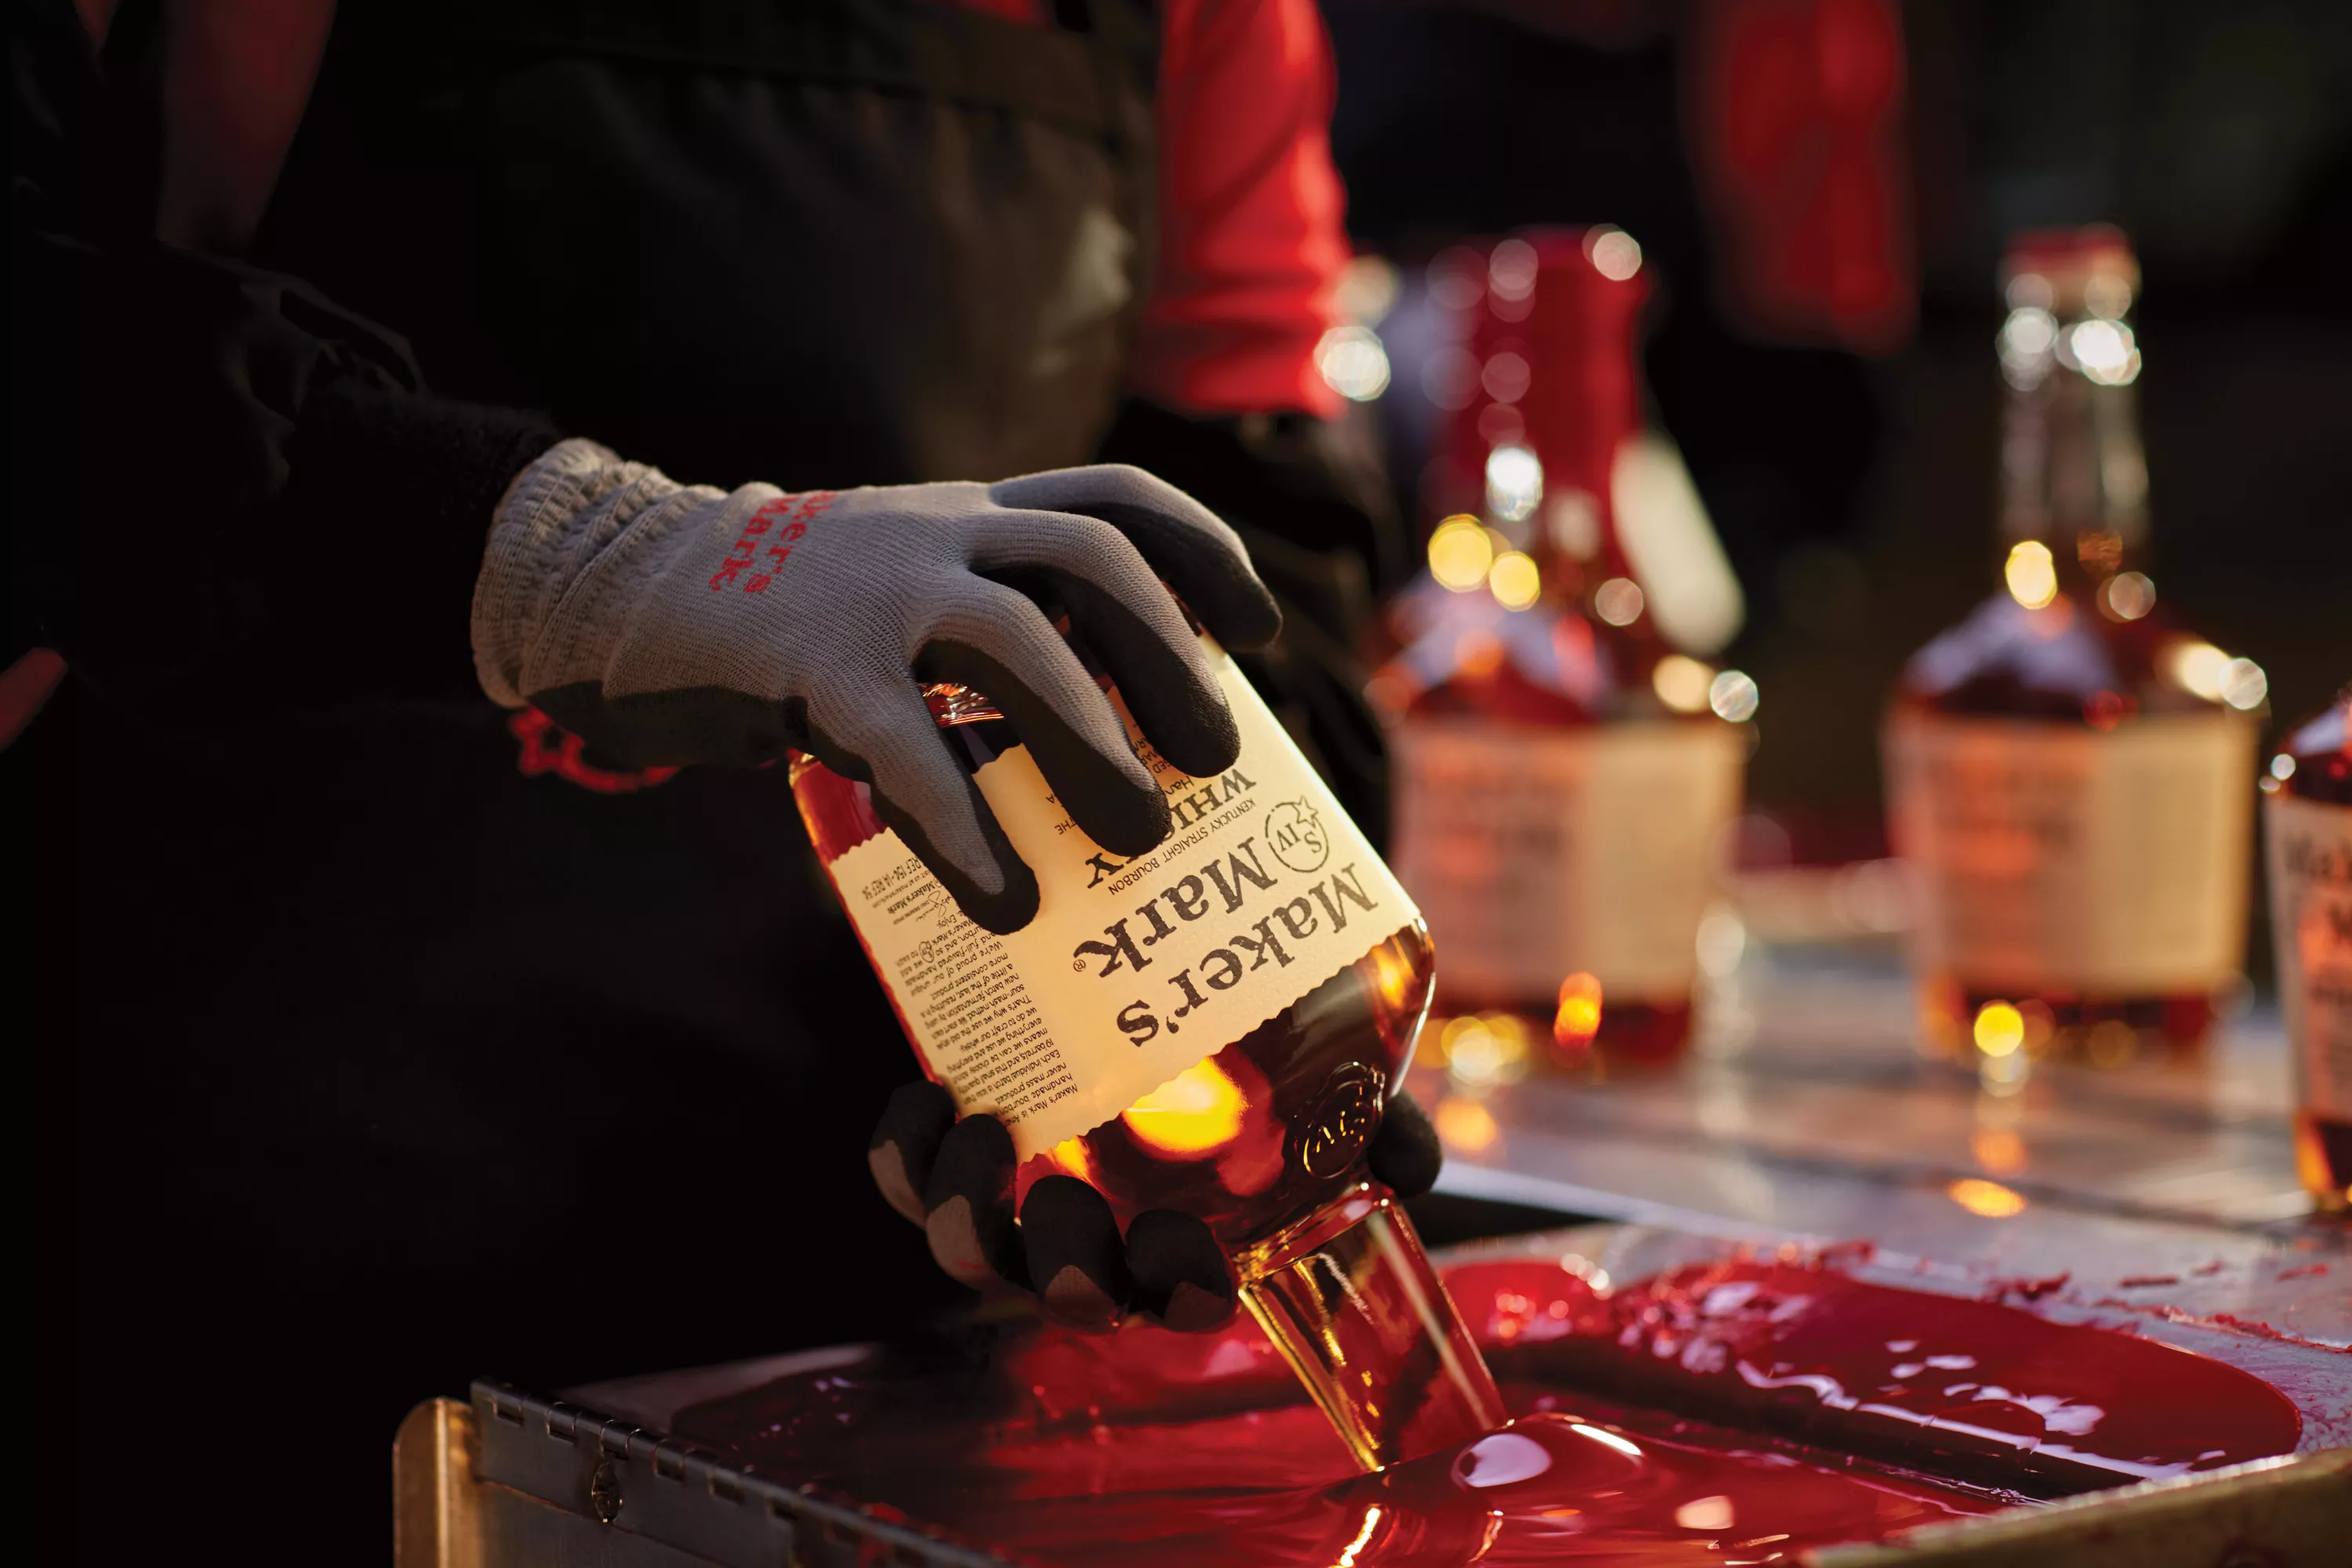 Maker's Mark 18 bourbon whisky bottle being dipped in red wax